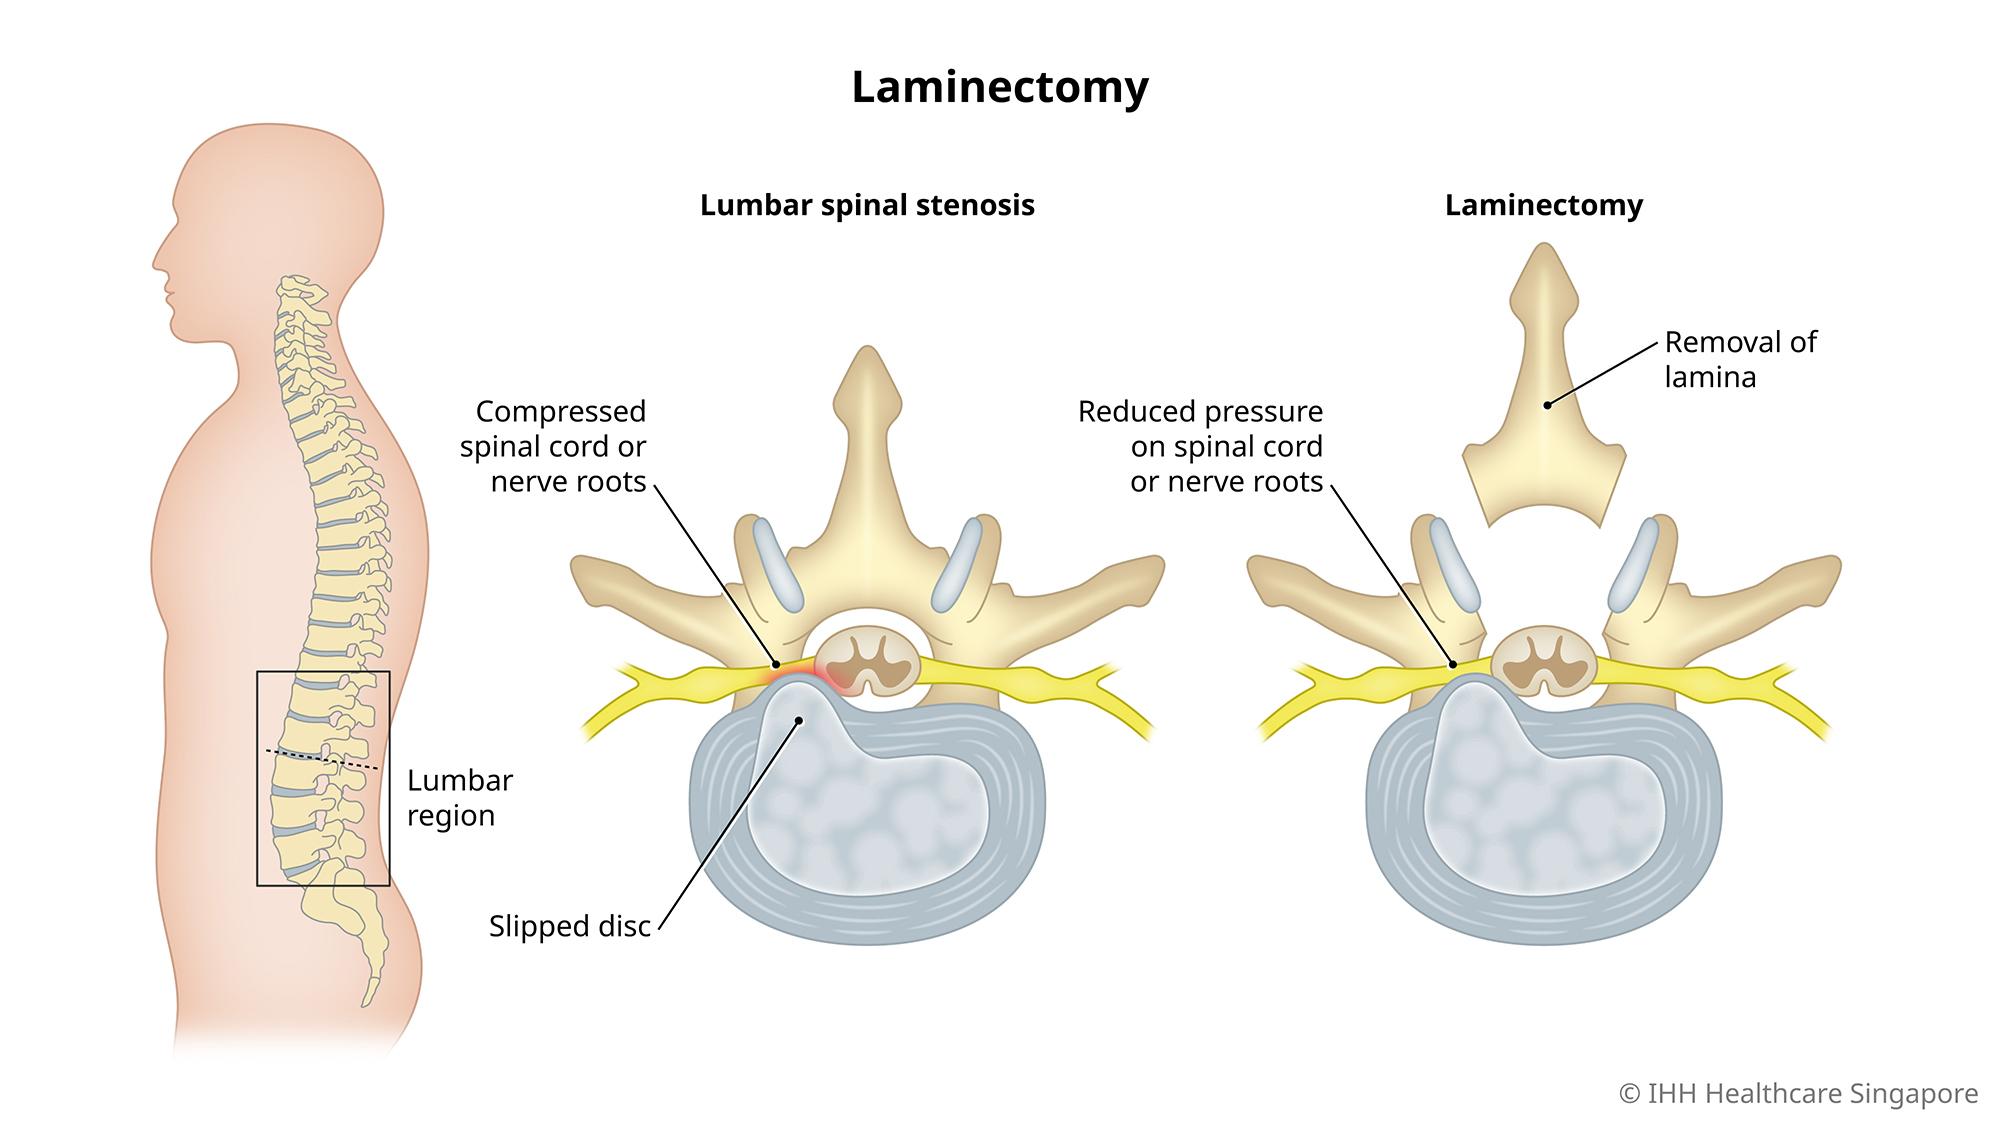 Decompression laminectomy reduces the pressure on the spinal cord or spinal nerve roots caused by spinal stenosis.